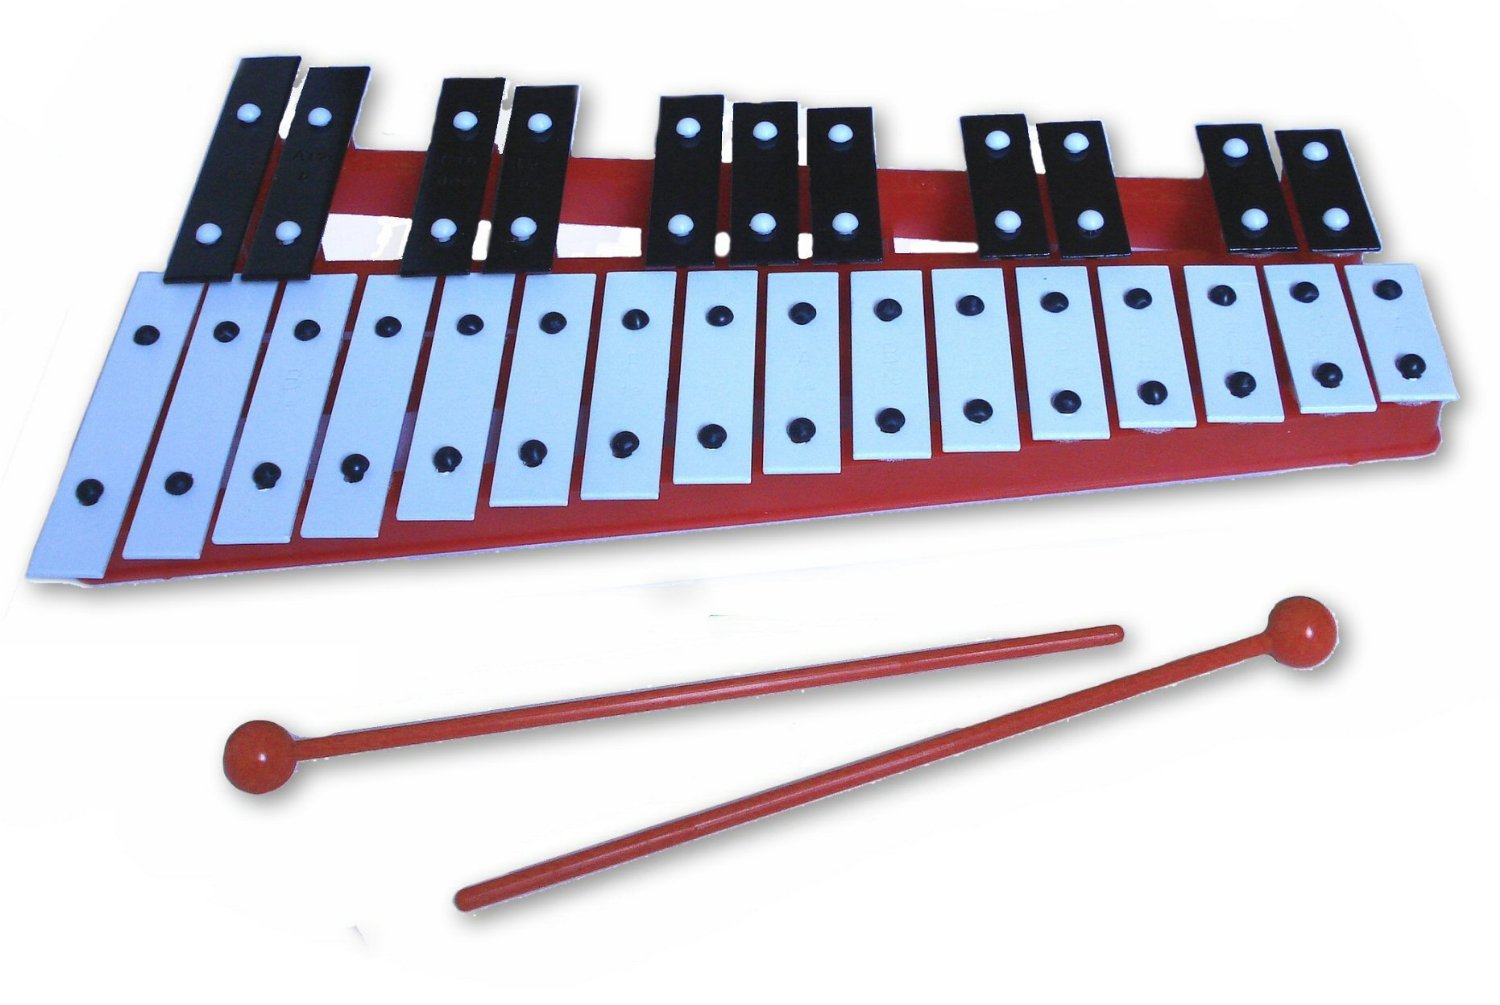 Free download clip art. Xylophone clipart red